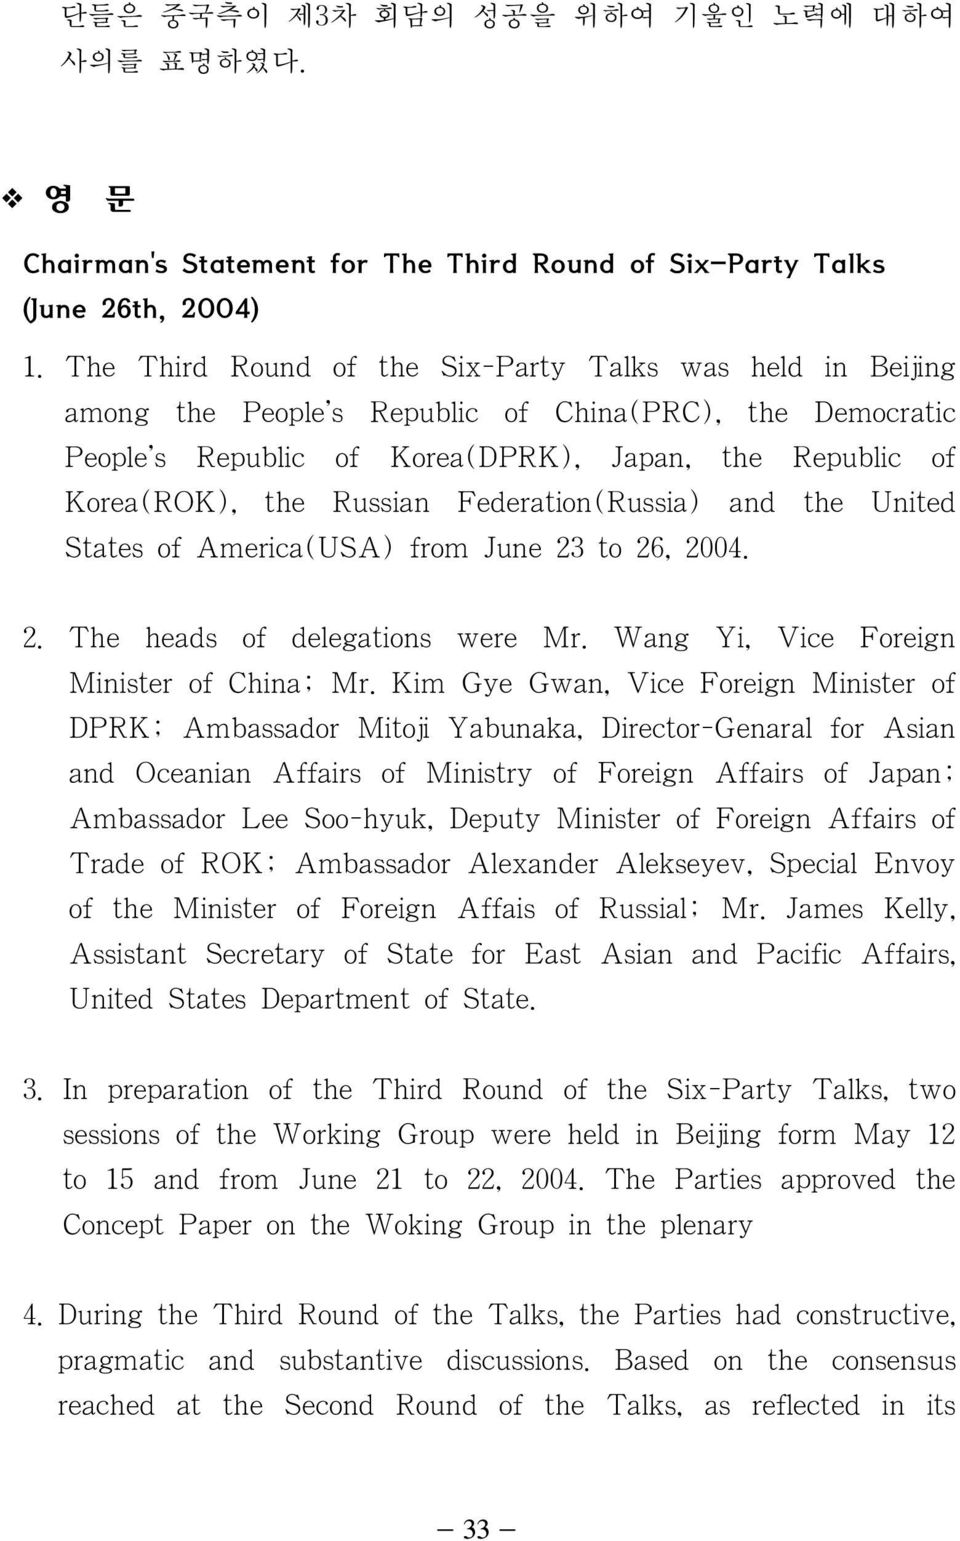 Federation(Russia) and the United States of America(USA) from June 23 to 26, 2004. 2. The heads of delegations were Mr. Wang Yi, Vice Foreign Minister of China; Mr.